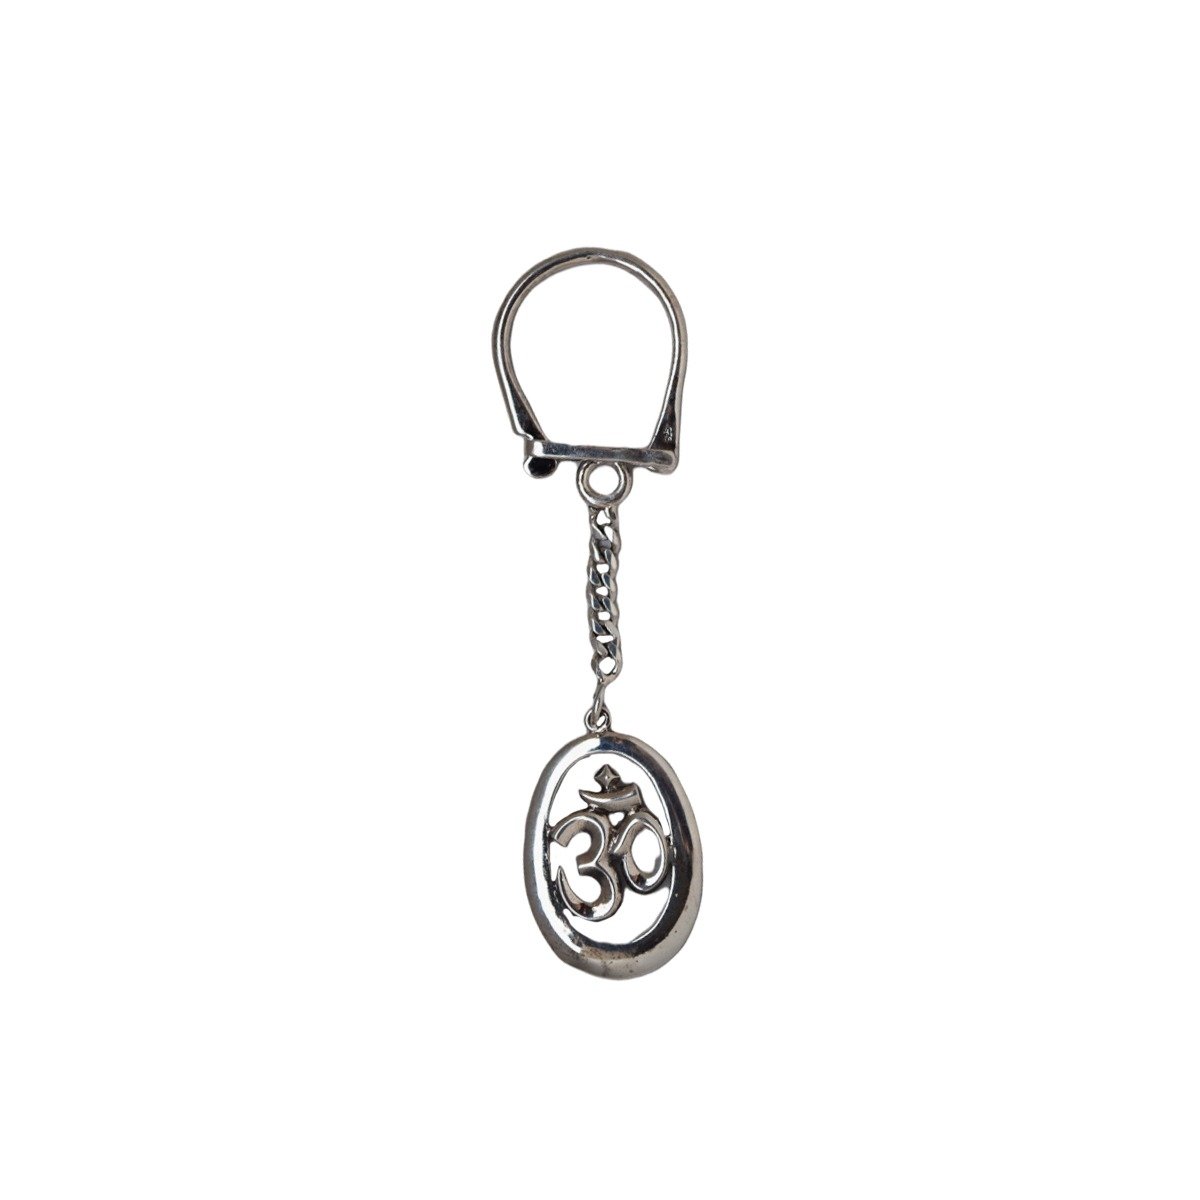 SILVER OM DESIGN KEYCHAIN OVAL SHAPED